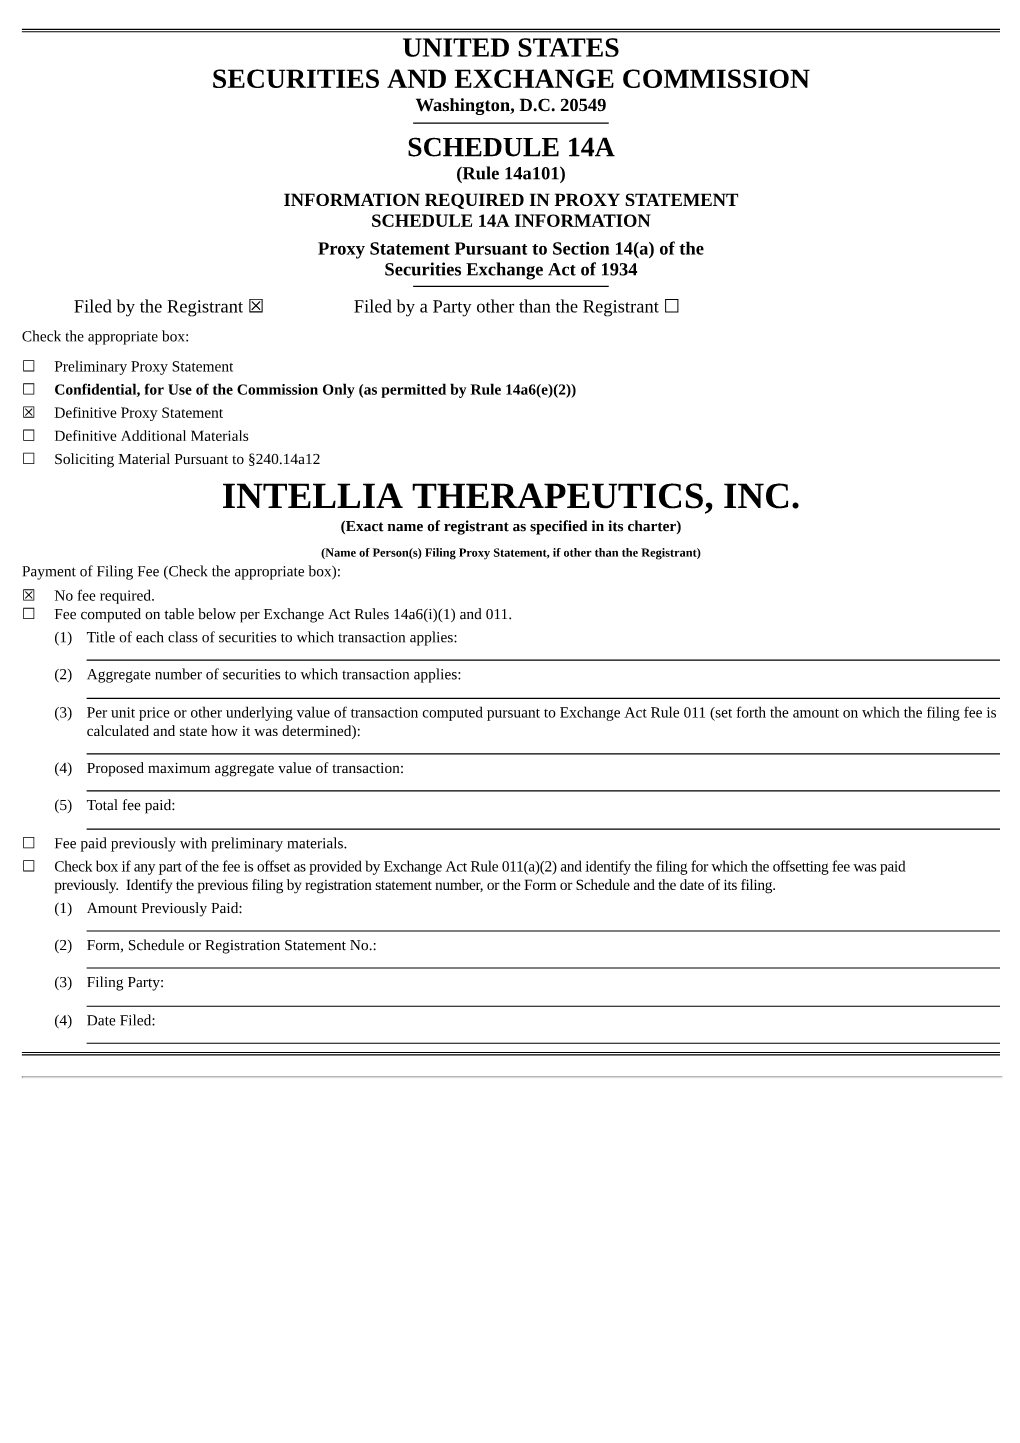 INTELLIA THERAPEUTICS, INC. (Exact Name of Registrant As Specified in Its Charter)